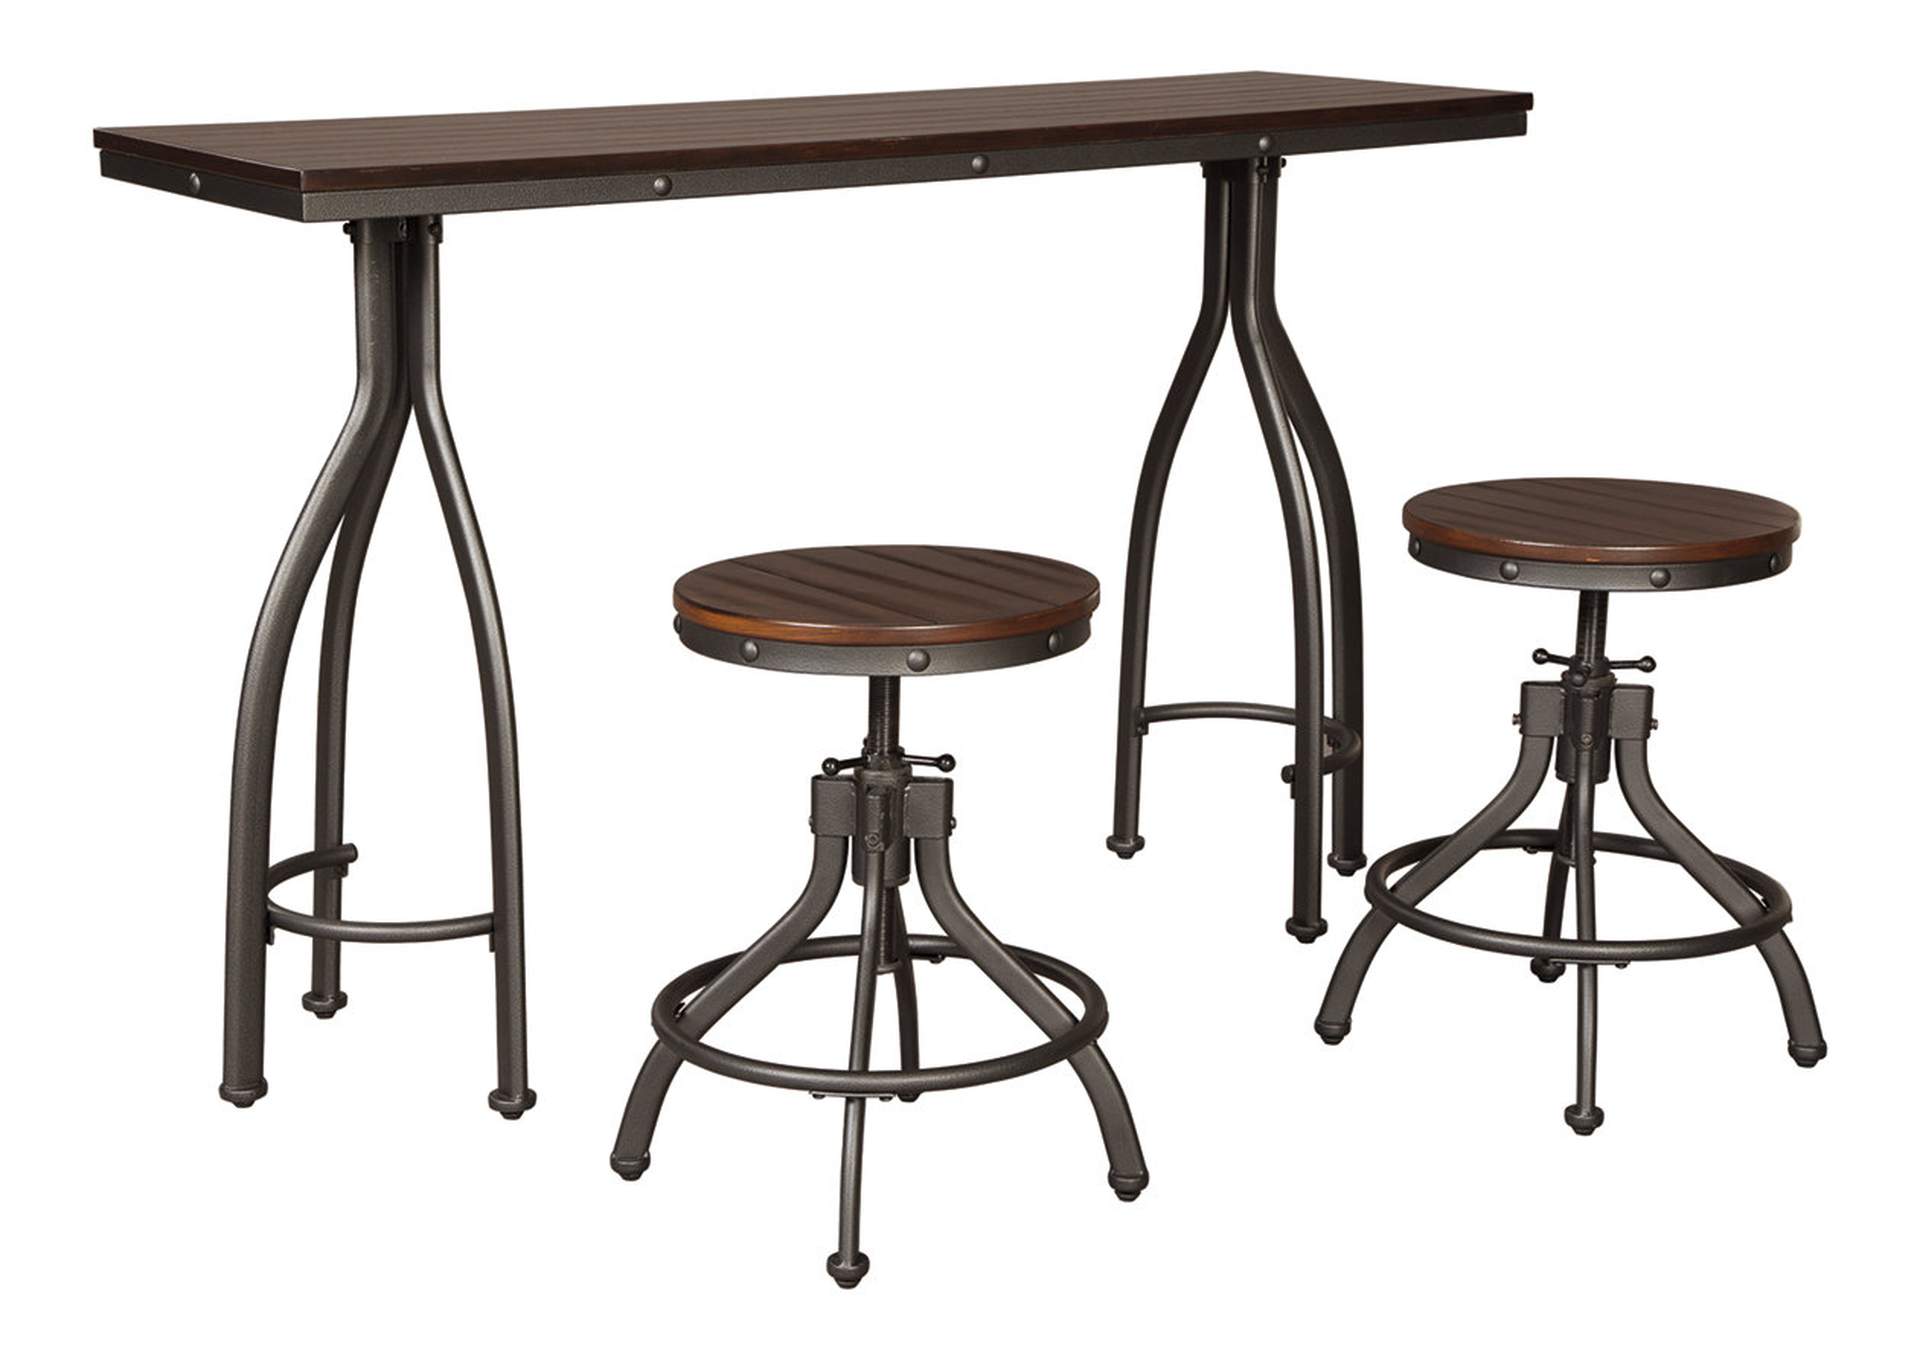 Odium Counter Height Dining Room Table and Bar Stools (Set of 3)